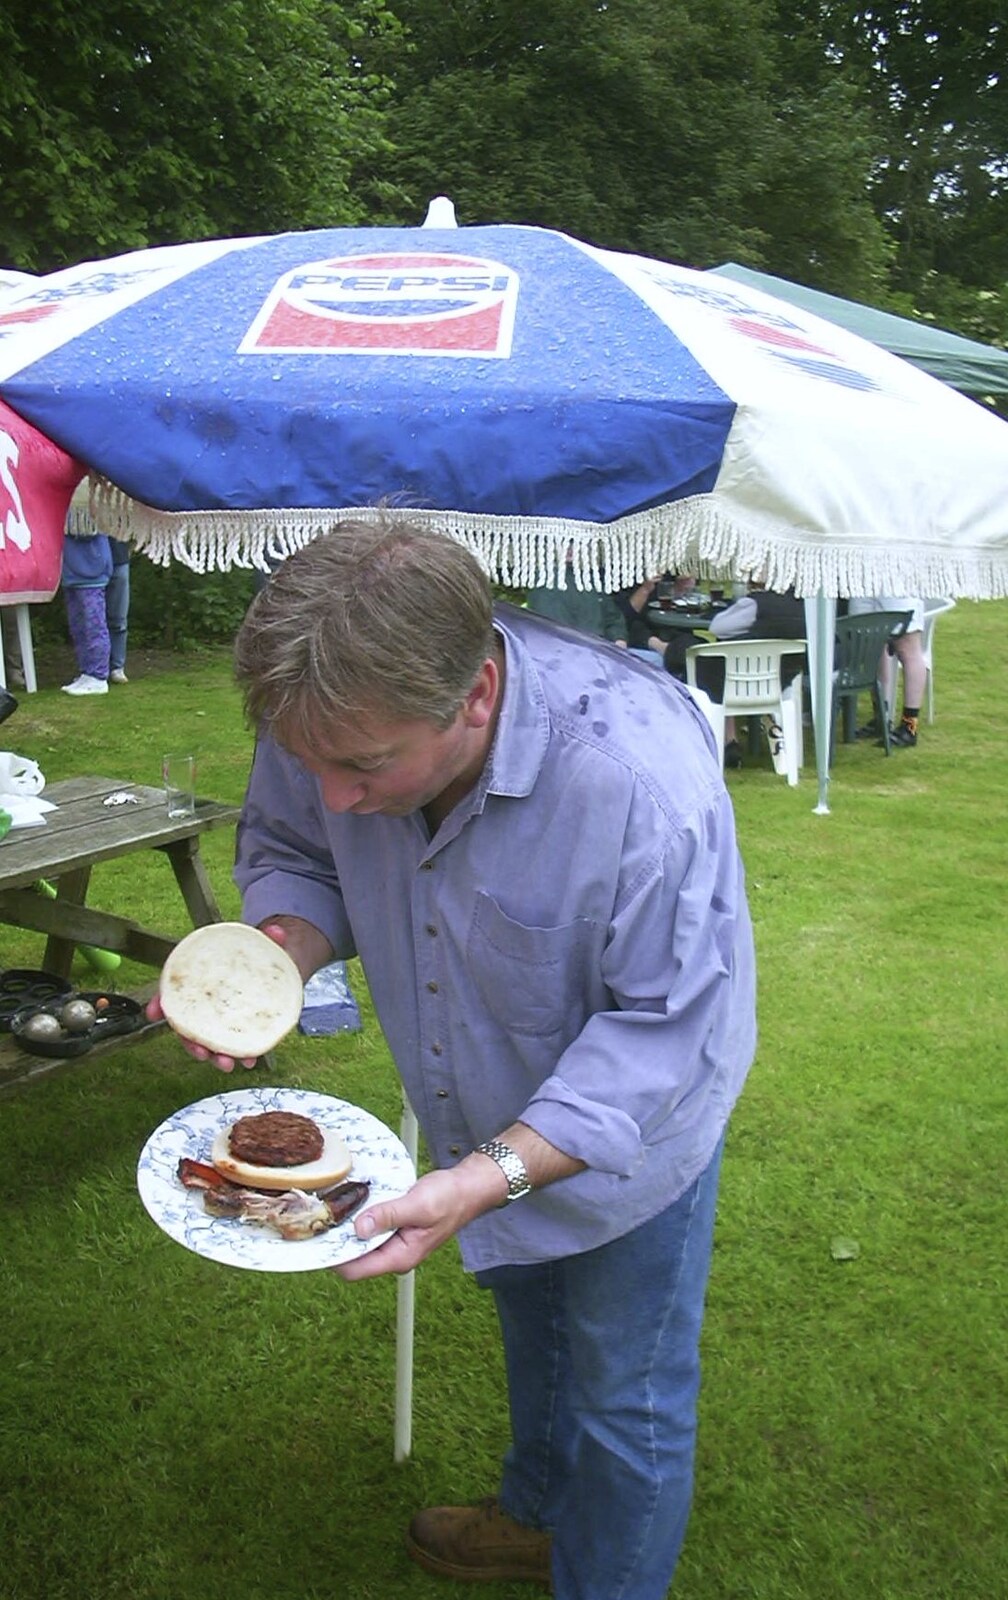 A Rainy Barbeque at the Swan Inn, Brome, Suffolk - 15th June 2002: Nigel shows off his lunch